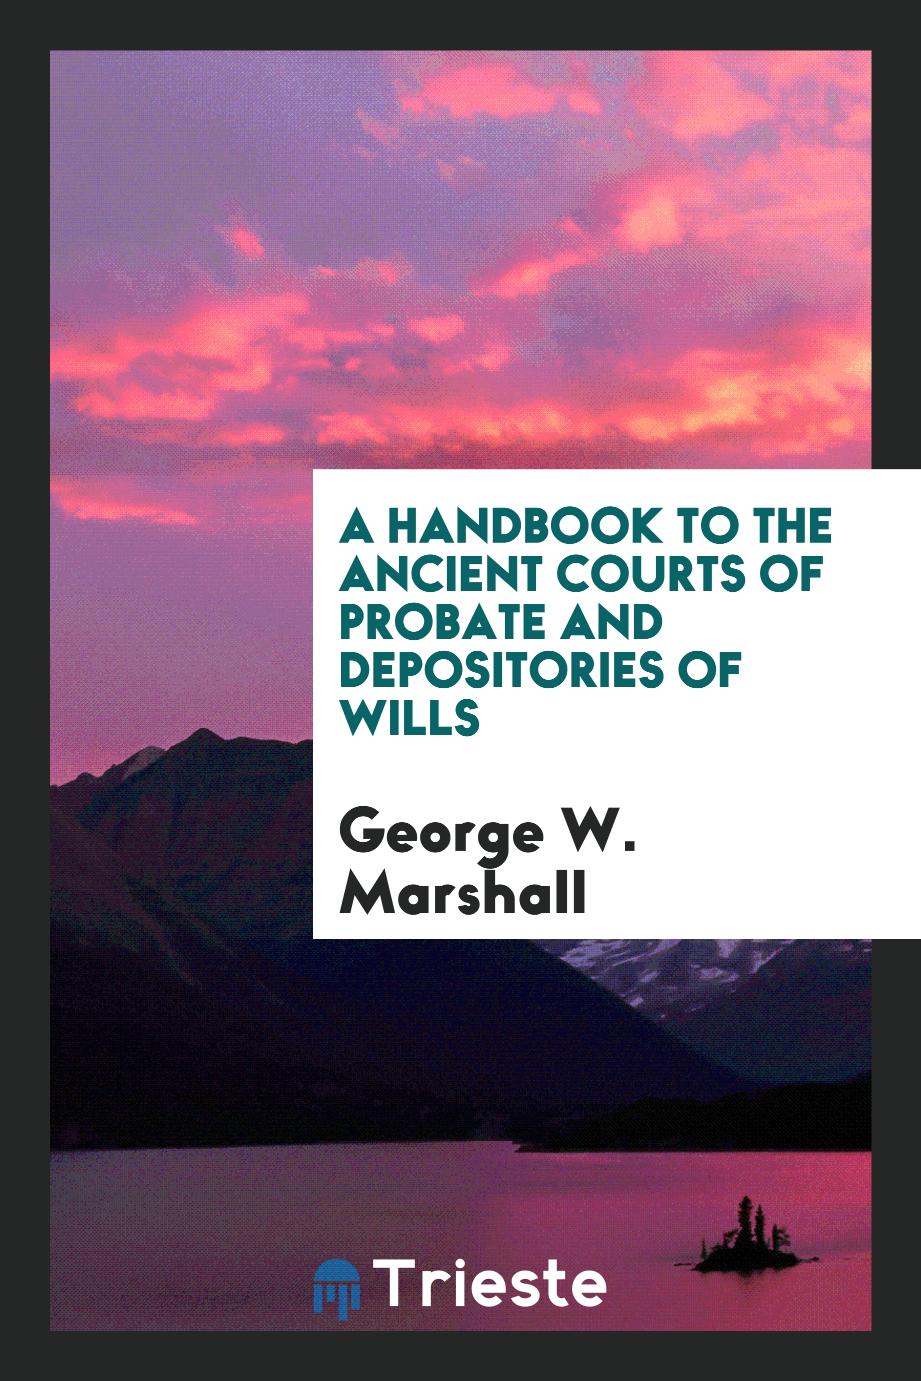 A Handbook to the Ancient Courts of Probate and Depositories of Wills